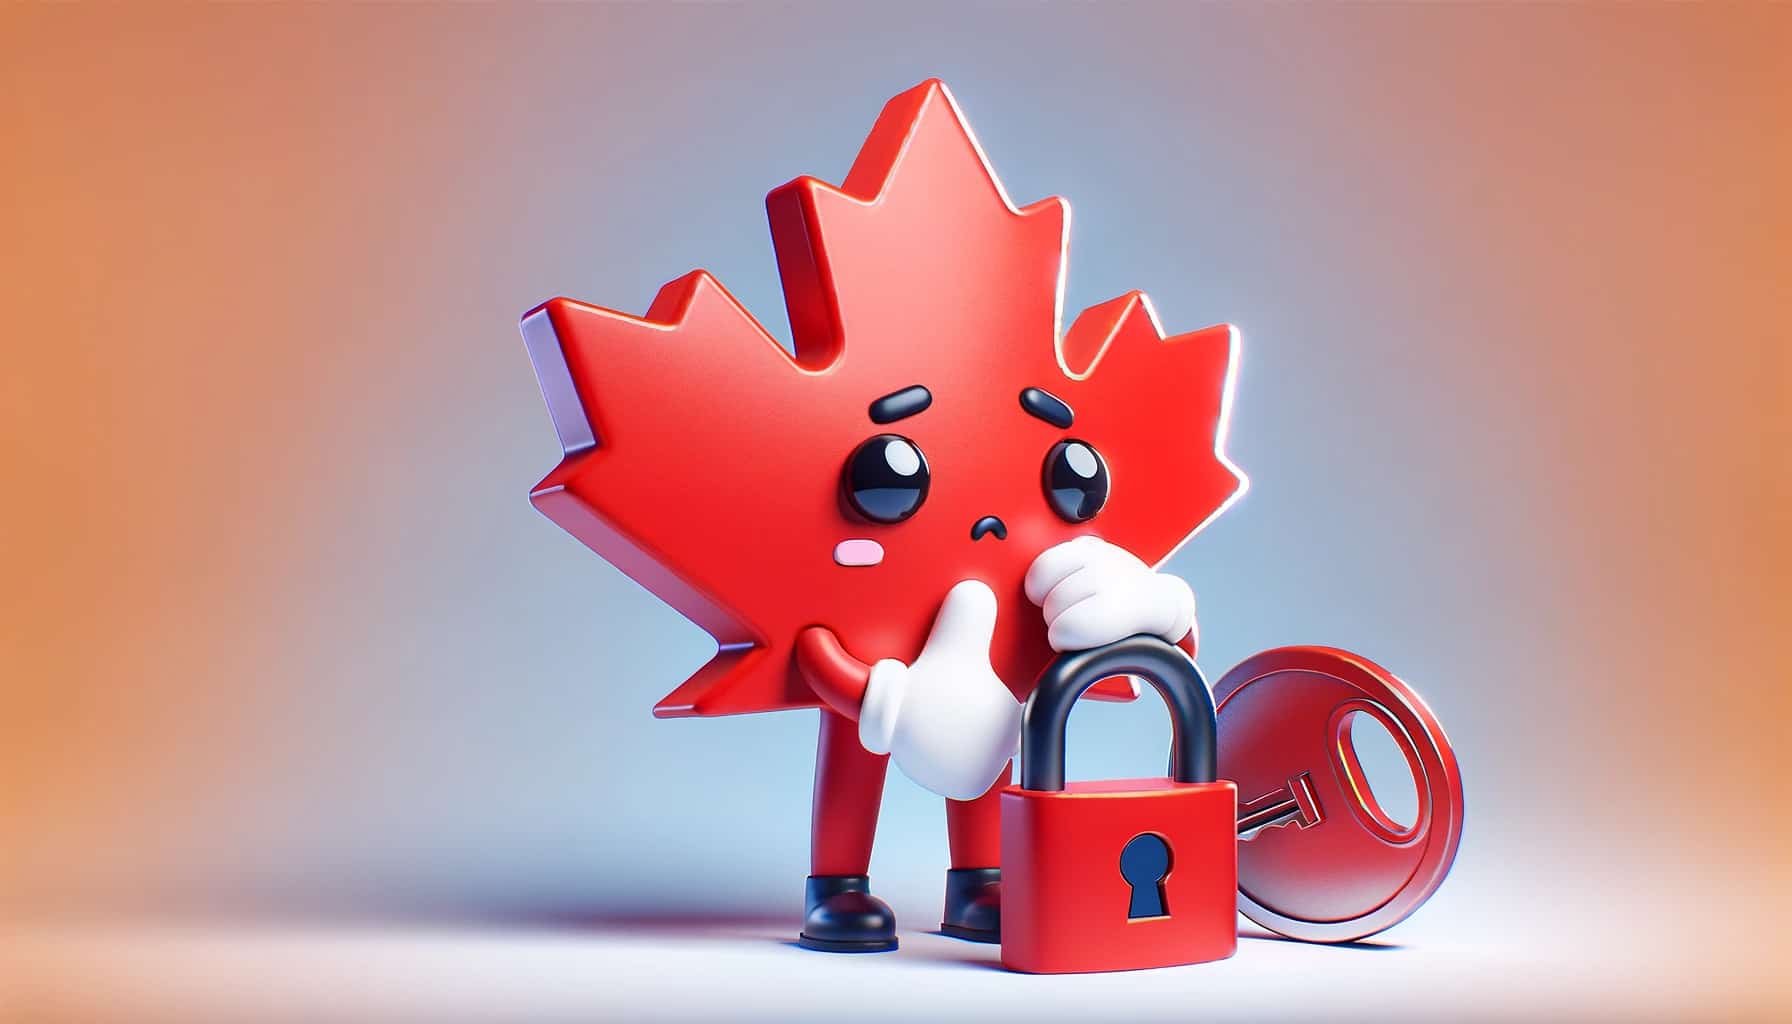 A cartoon character holding a padlock and a Canada maple leaf, symbolizing security